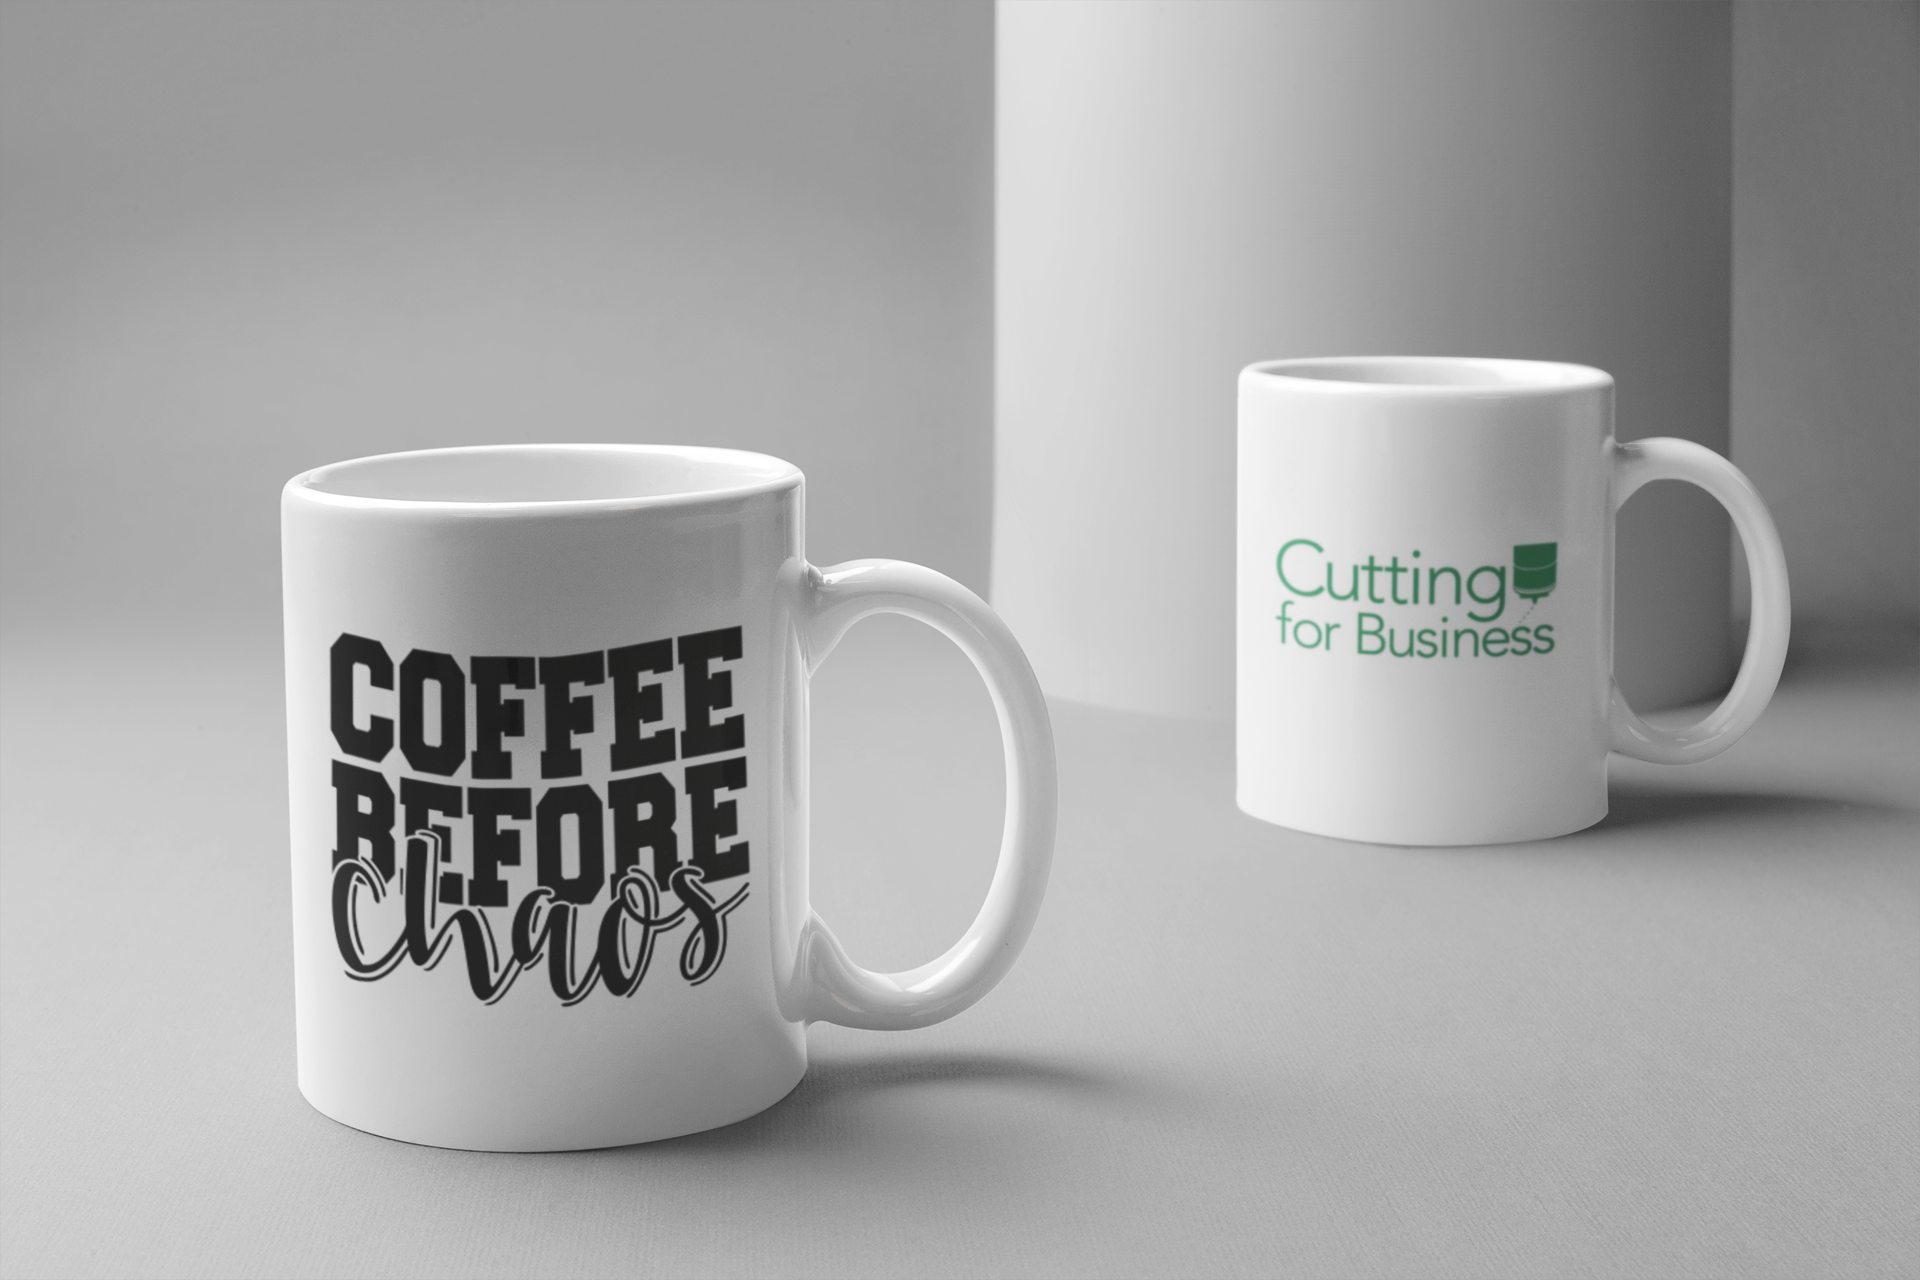 How to Protect Your Product Photos without a Watermark - Example 4 - cuttingforbusiness.com.